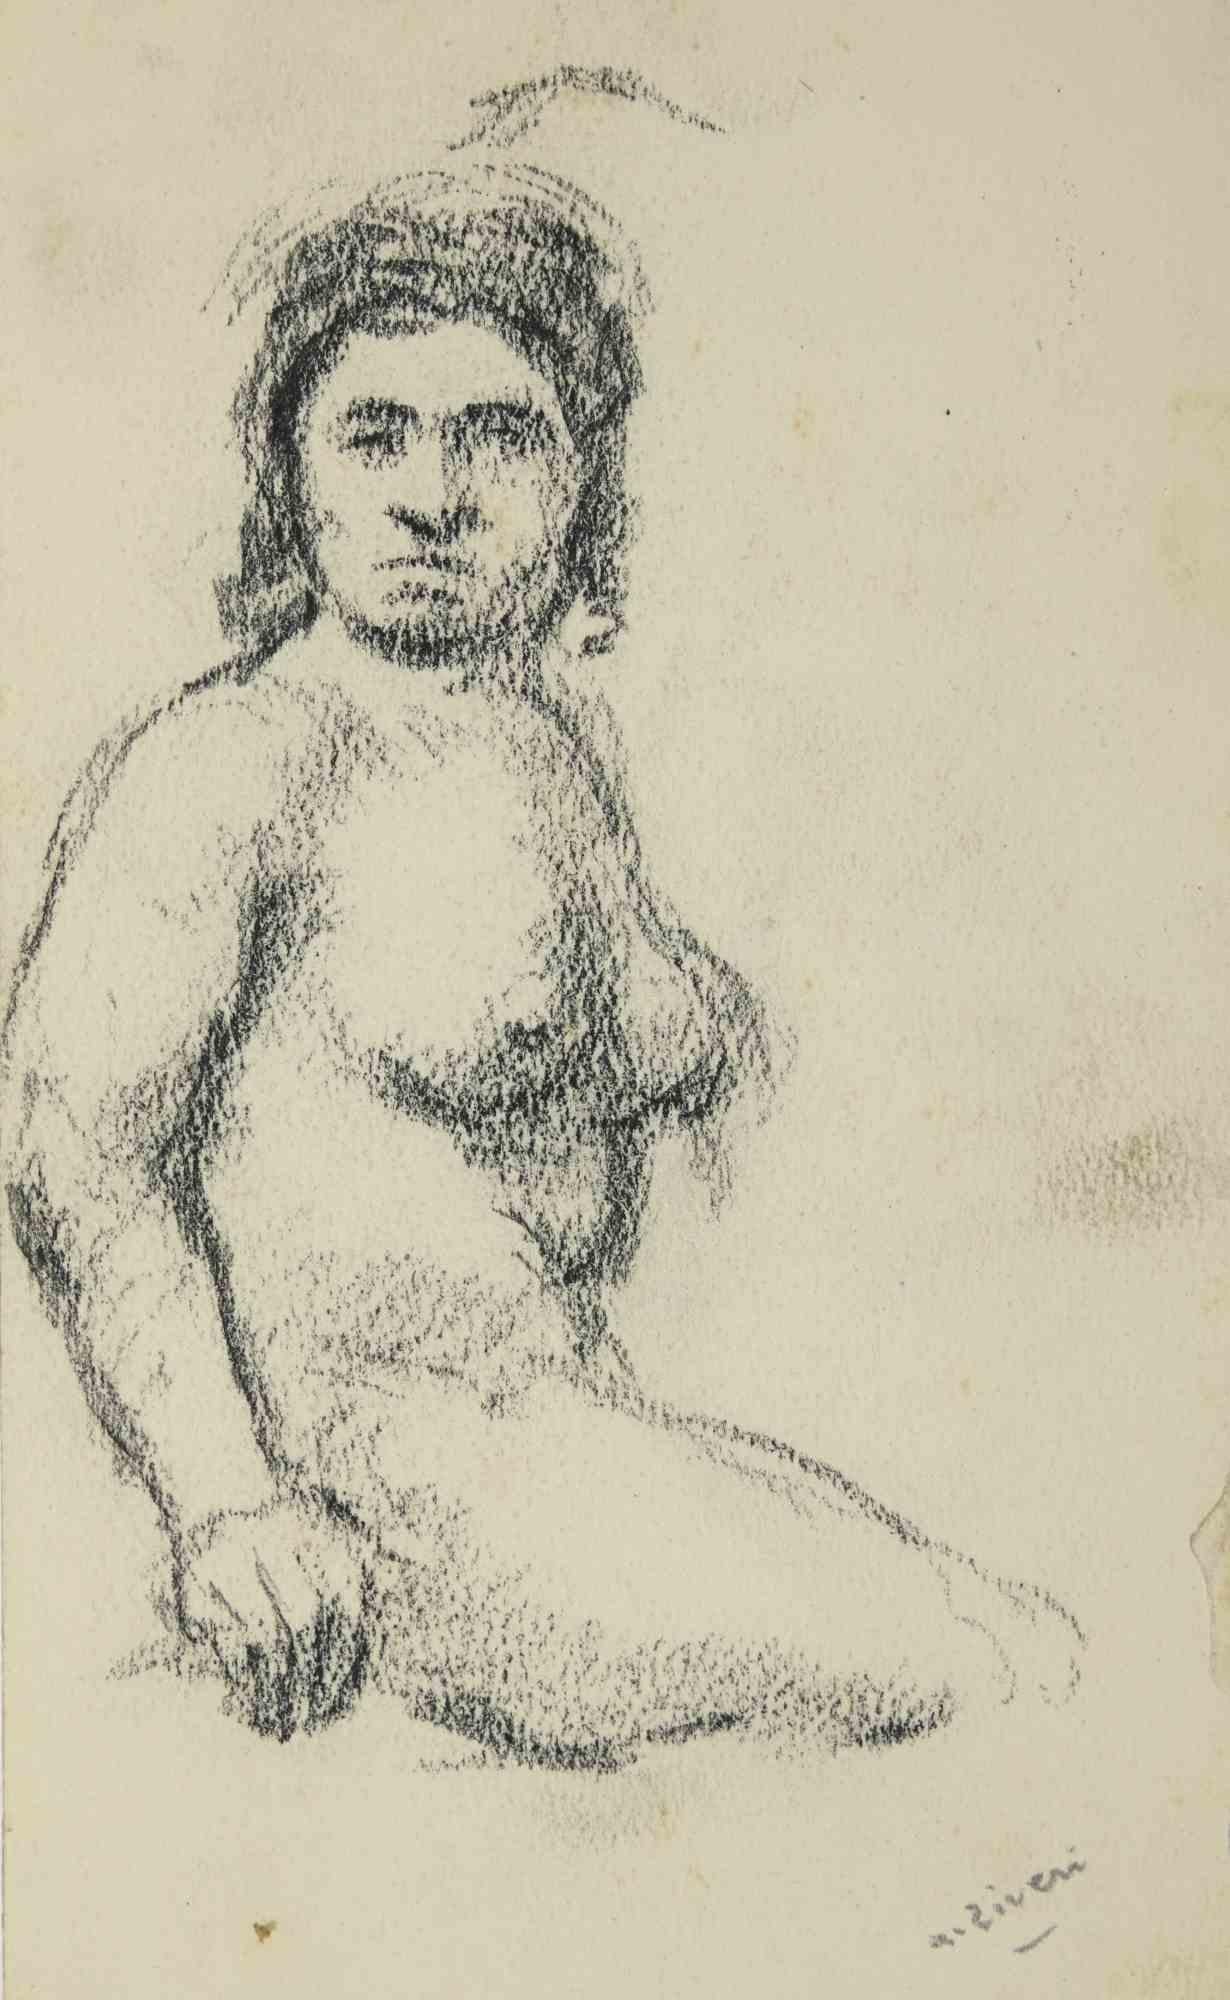 The Nude is a drawing realized by Alberto Ziveri in 1930s.

Charcoal on paper

Hand-signed.

In good conditions. 

The artwork is represented through deft strokes masterly.

Alberto Ziveri (Rome,1908 – 1990), the Italian painter of the Roman school,